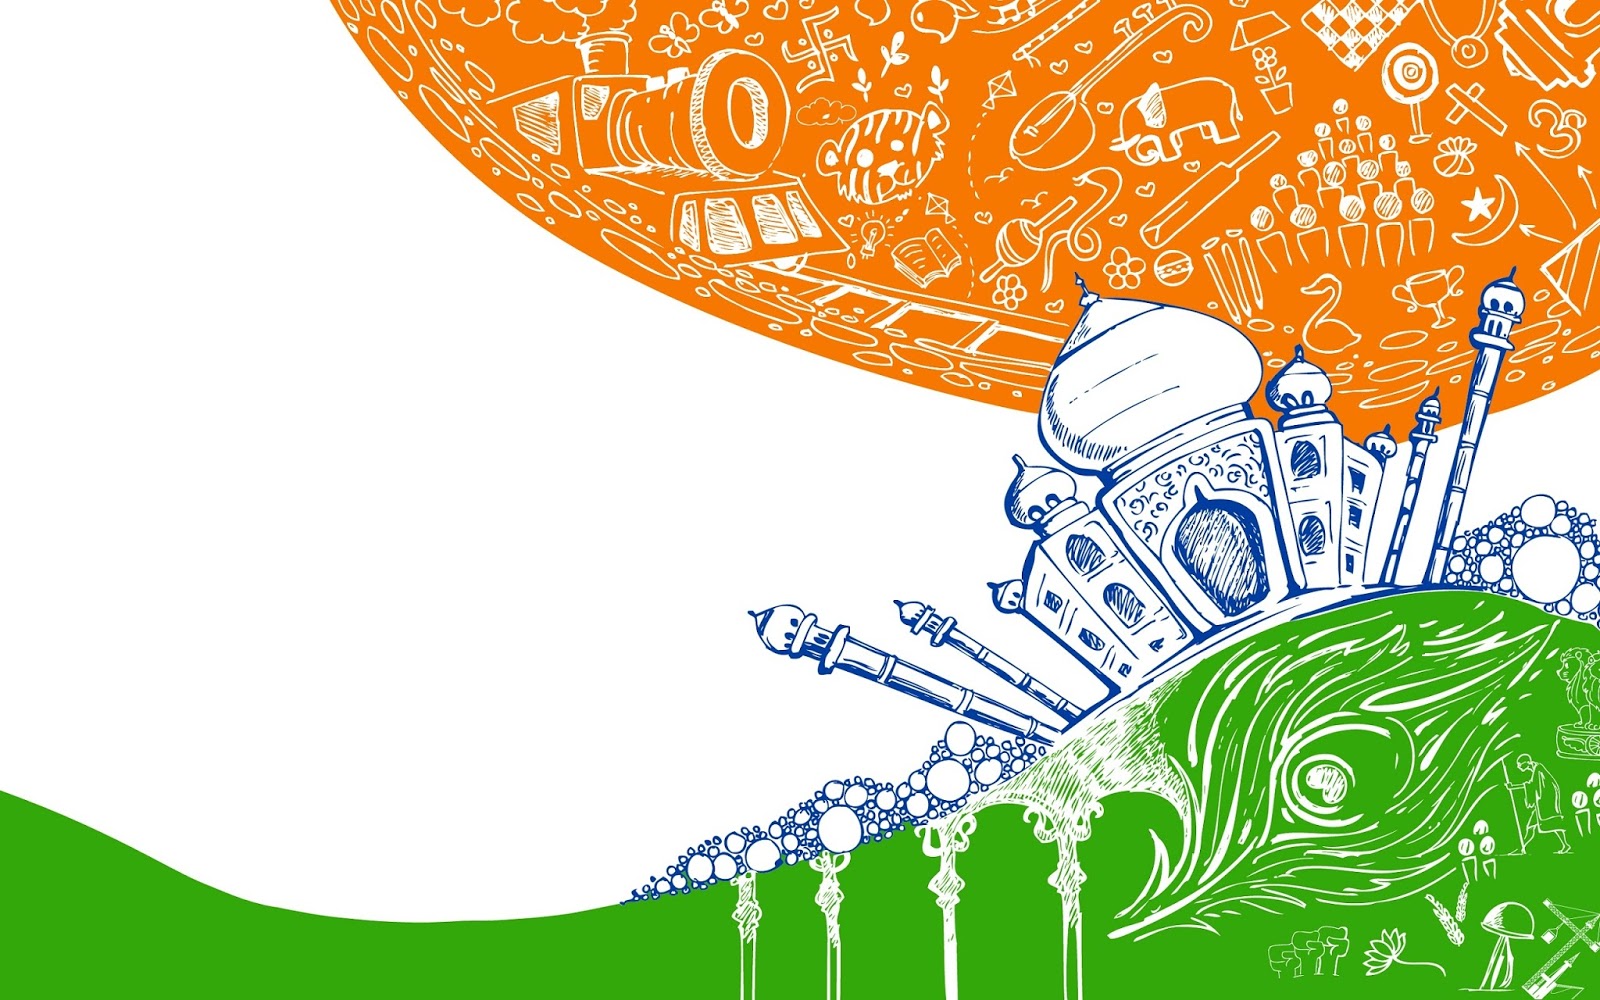  10+  26 January Happy Republic Day Wallpaper in HD FREE Download